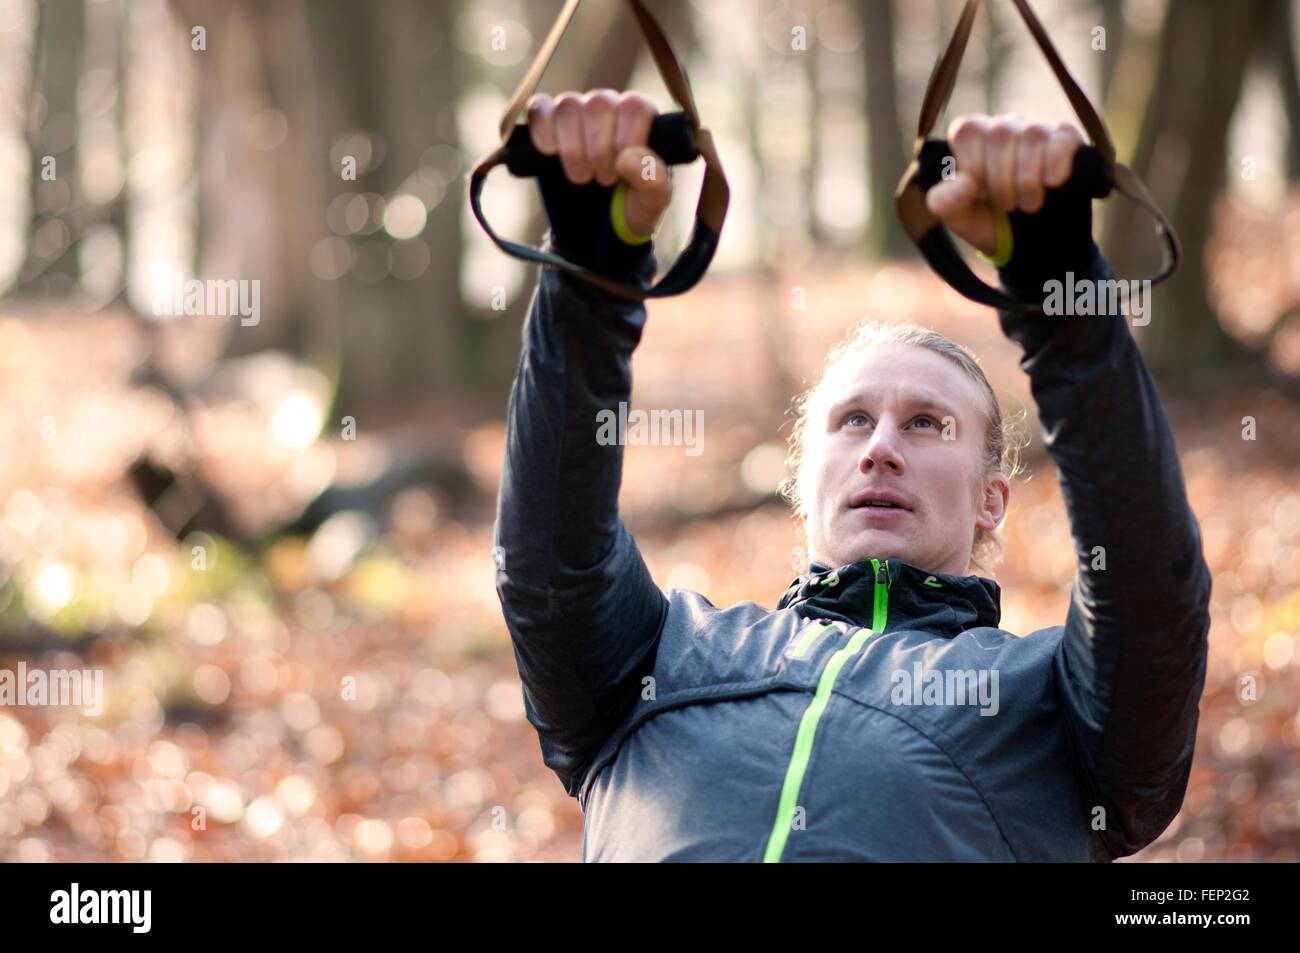 Mid adult man using resistance bands, looking up Stock Photo